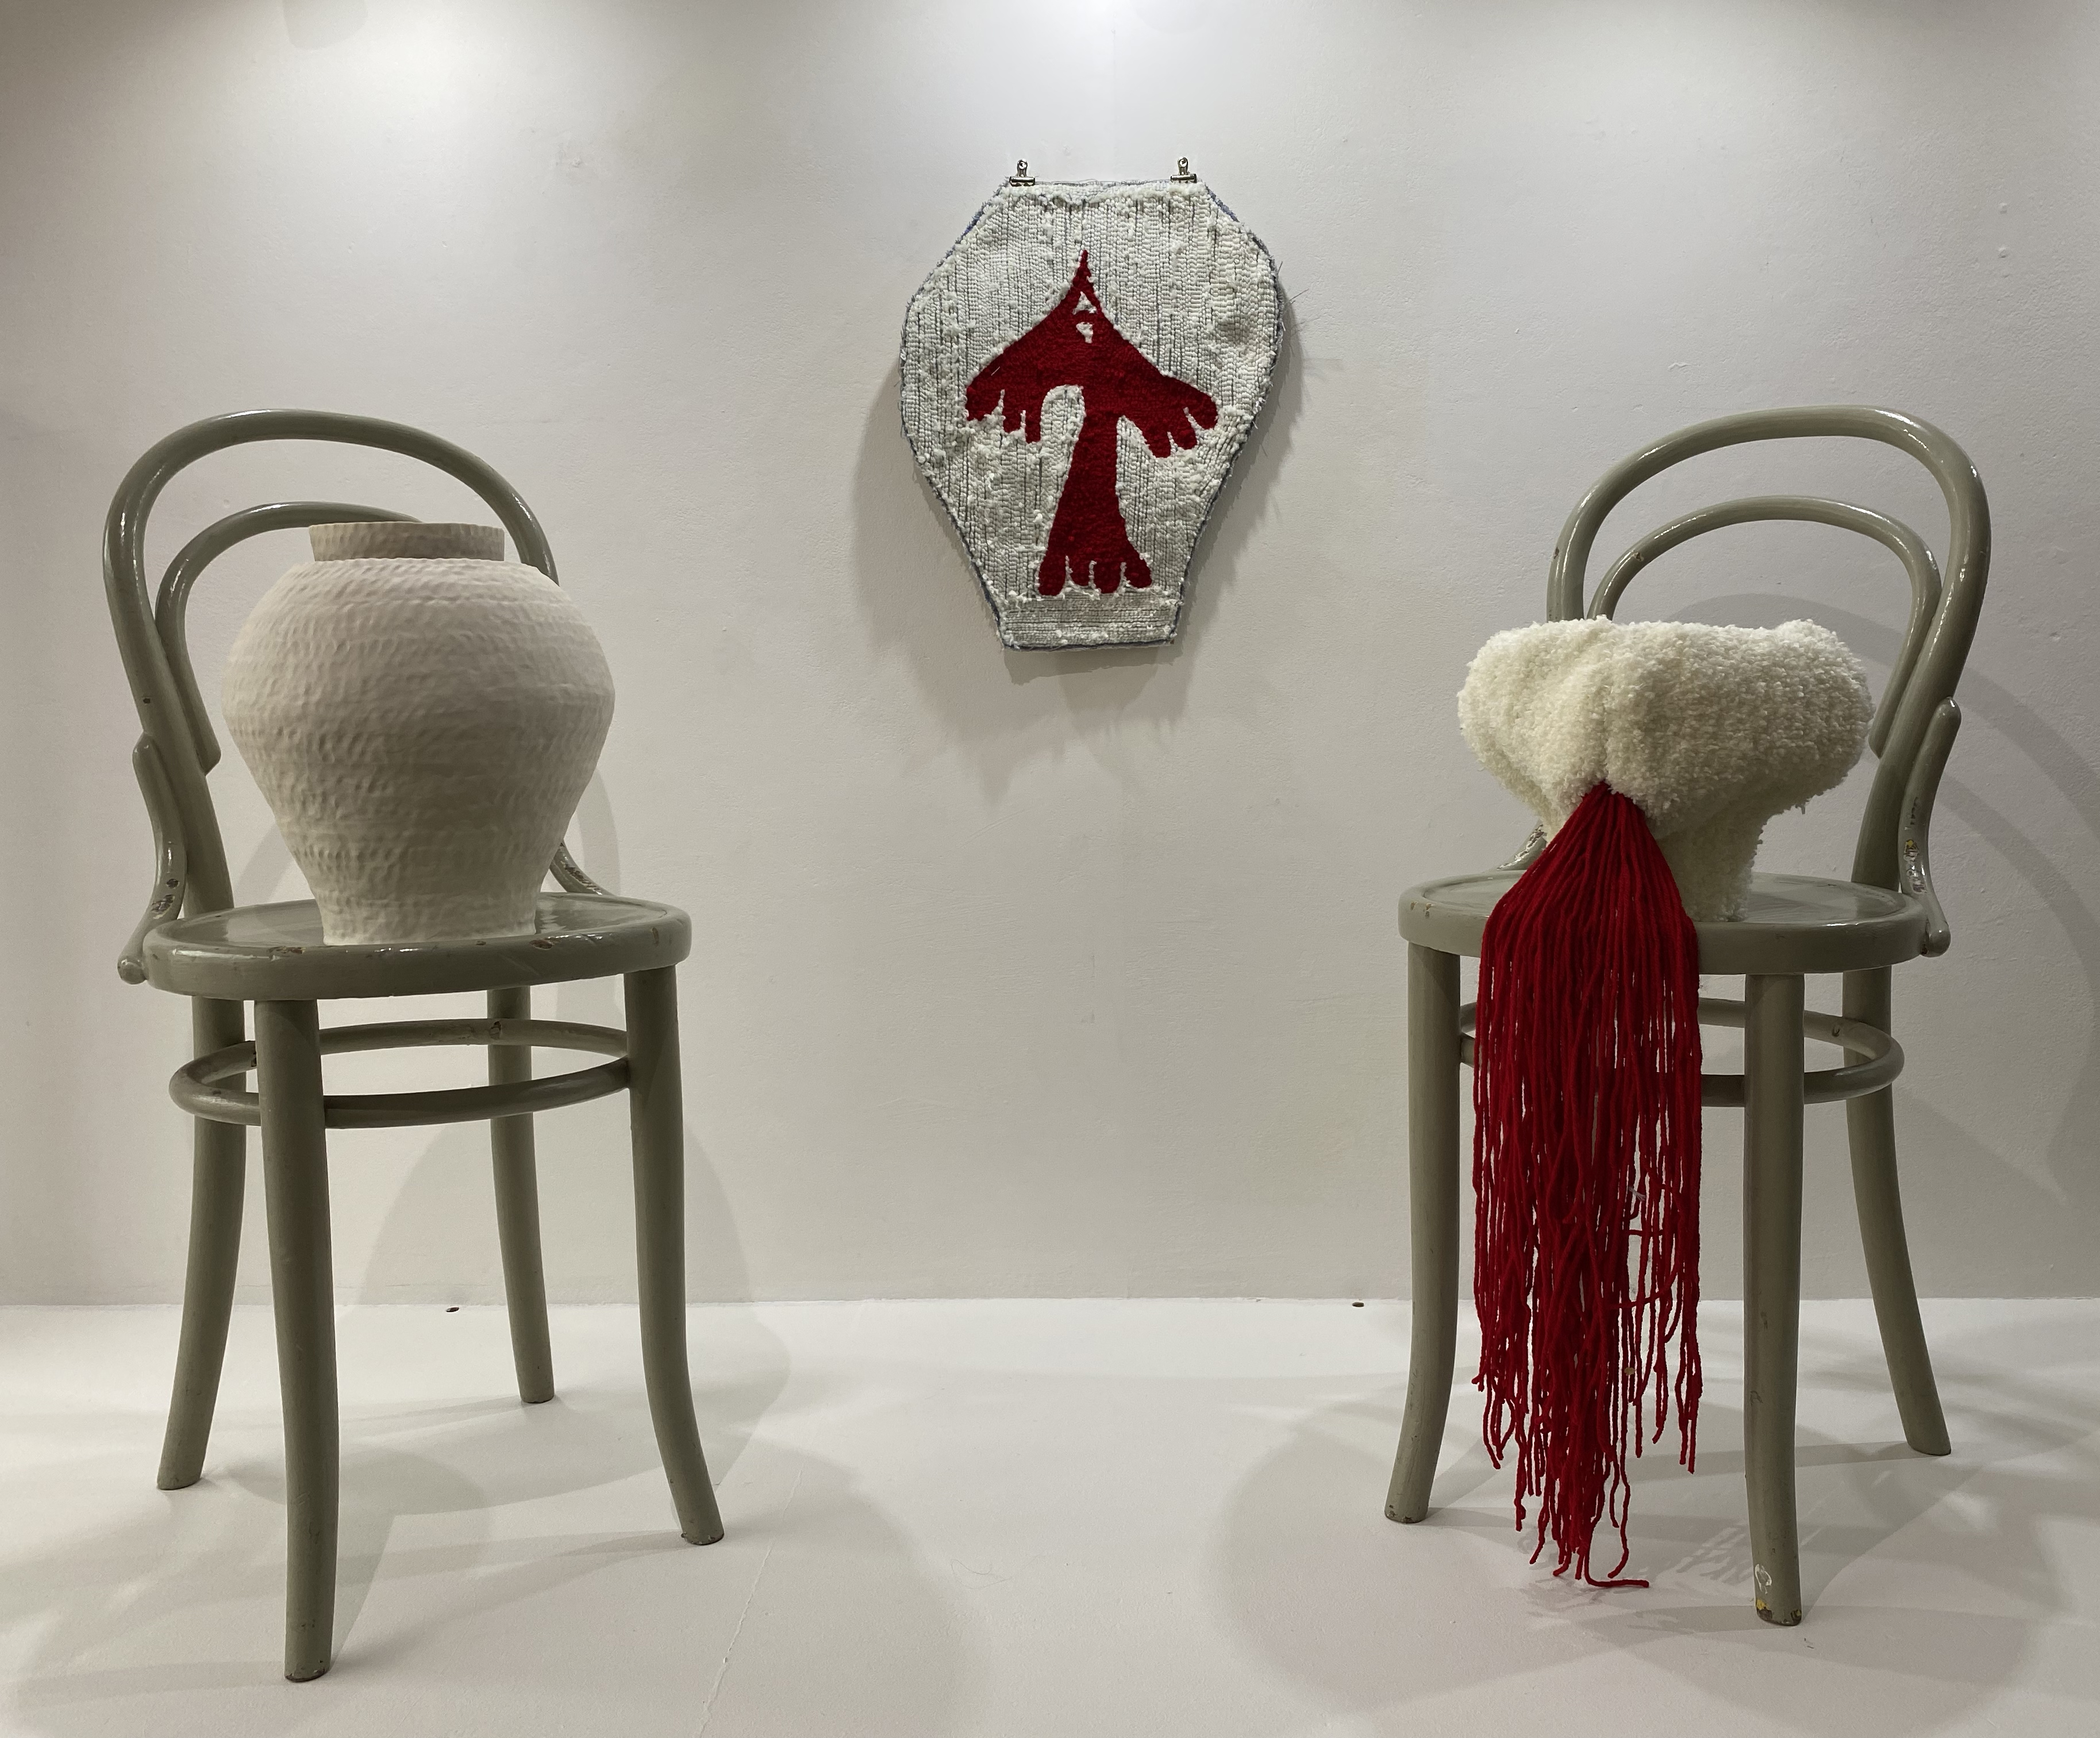 Two white vessles in conversation on soft green bentwood chairs. One is ceramic, the other is rugged. On the wall in between the chairs is a third white vessle showing a red bird inside. Long bits of red yarn spills out of the rugged vessle.